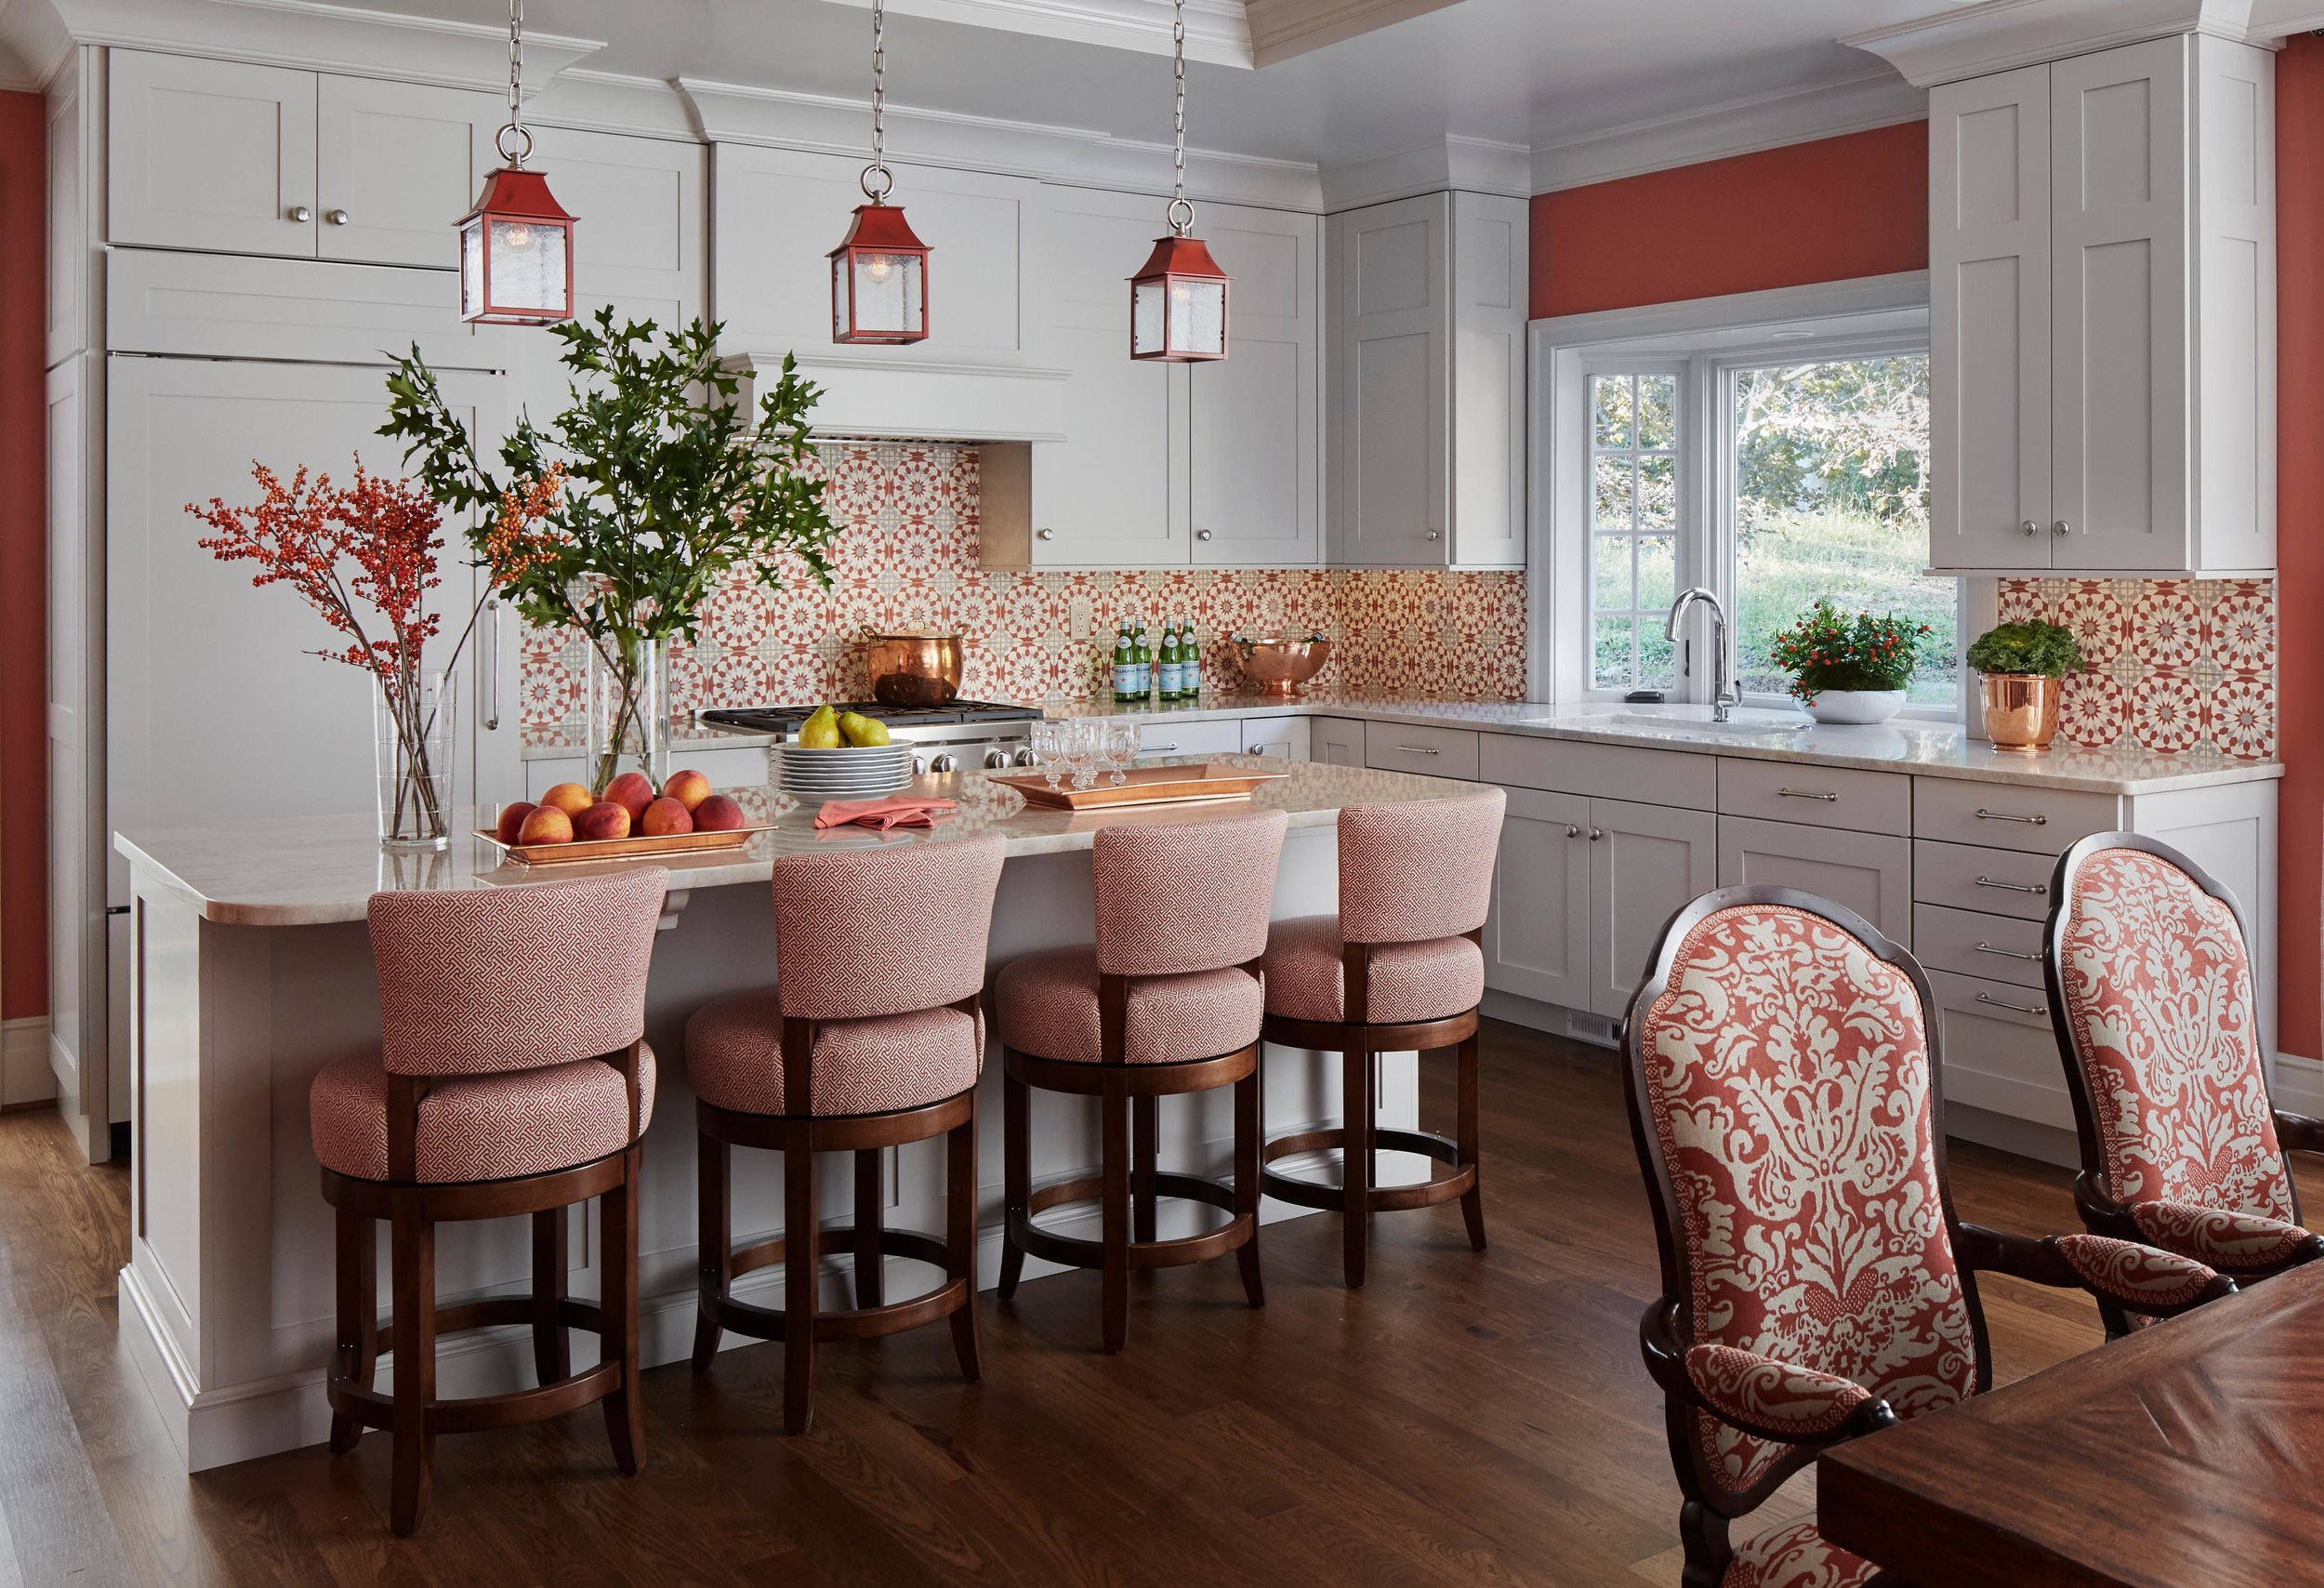 Coral accents in a beautiful classic kitchen. Come see more interior design inspiration from Elizabeth Drake. Photo by Werner Straube. #interiordesign #classicdesign #traditionaldecor #housetour #elizabethdrake